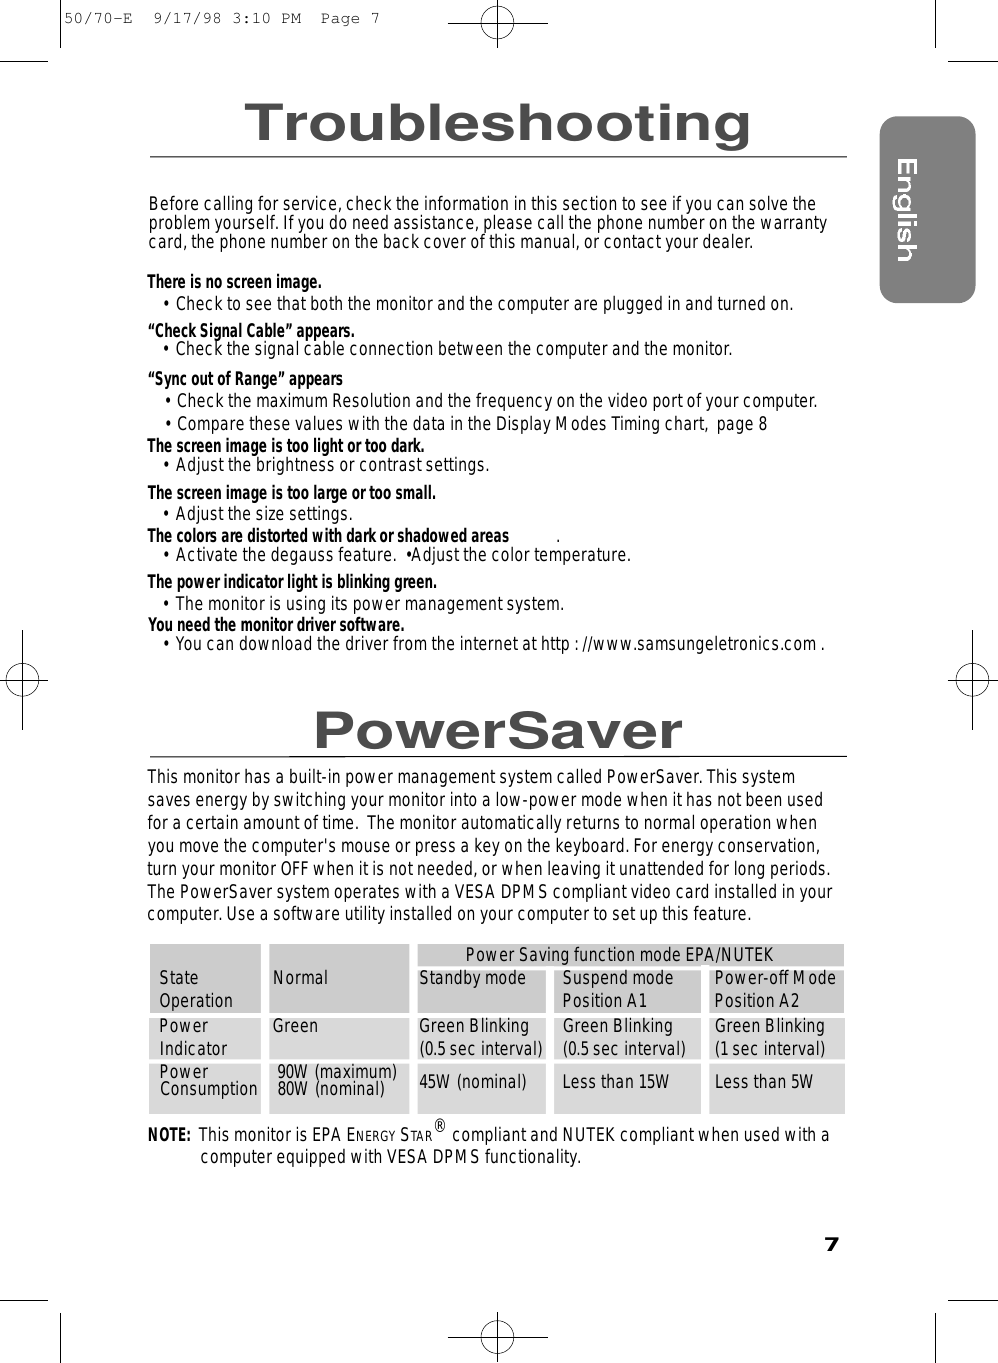 7TroubleshootingPowerSaverBefore calling for service, check the information in this section to see if you can solve theproblem yourself. If you do need assistance, please call the phone number on the warrantycard, the phone number on the back cover of this manual, or contact your dealer.There is no screen image.• Check to see that both the monitor and the computer are plugged in and turned on.“Check Signal Cable” appears.• Check the signal cable connection between the computer and the monitor.“Sync out of Range” appears• Check the maximum Resolution and the frequency on the video port of your computer.• Compare these values with the data in the Display Modes Timing chart,  page 8The screen image is too light or too dark.• Adjust the brightness or contrast settings.The screen image is too large or too small.• Adjust the size settings.The colors are distorted with dark or shadowed areas .• Activate the degauss feature.  •Adjust the color temperature. The power indicator light is blinking green.• The monitor is using its power management system. You need the monitor driver software.• You can download the driver from the internet at http : //www.samsungeletronics.com .This monitor has a built-in power management system called PowerSaver. This systemsaves energy by switching your monitor into a low-power mode when it has not been usedfor a certain amount of time.  The monitor automatically returns to normal operation whenyou move the computer&apos;s mouse or press a key on the keyboard. For energy conservation,turn your monitor OFF when it is not needed, or when leaving it unattended for long periods.The PowerSaver system operates with a VESA DPMS compliant video card installed in yourcomputer. Use a software utility installed on your computer to set up this feature.  Power Saving function mode EPA/NUTEKState Normal  Standby mode Suspend mode  Power-off ModeOperation Position A1 Position A2Power Green Green Blinking Green Blinking Green BlinkingIndicator (0.5 sec interval) (0.5 sec interval) (1 sec interval)Power 90W (maximum) 45W (nominal) Less than 15W Less than 5WConsumption 80W (nominal)NOTE:  This monitor is EPA ENERGY STAR®compliant and NUTEK compliant when used with a  computer equipped with VESA DPMS functionality.50/70-E  9/17/98 3:10 PM  Page 7